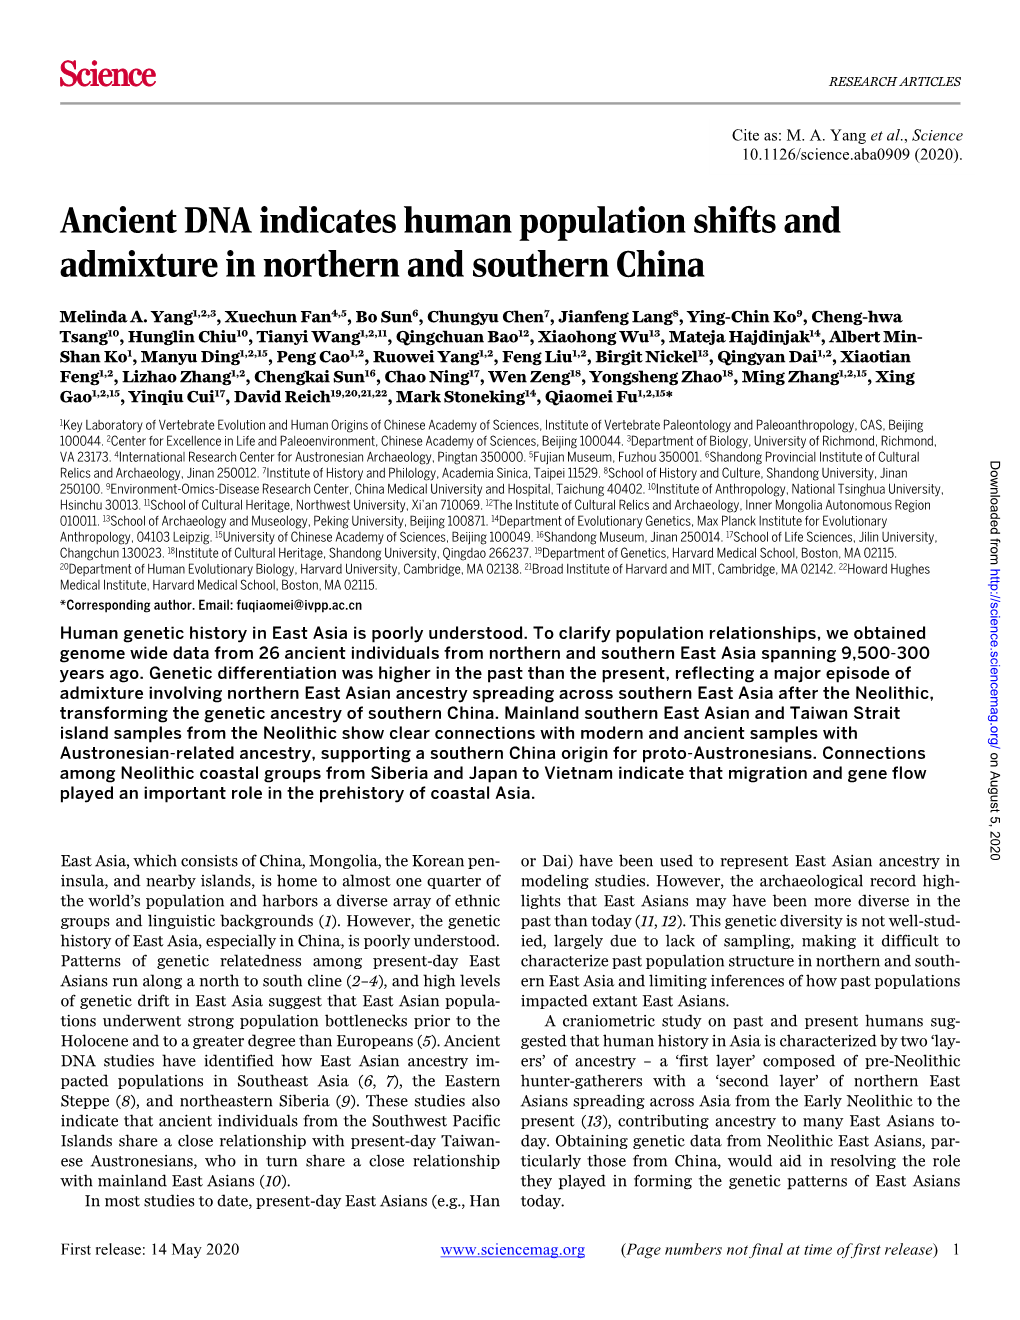 Ancient DNA Indicates Human Population Shifts and Admixture in Northern and Southern China